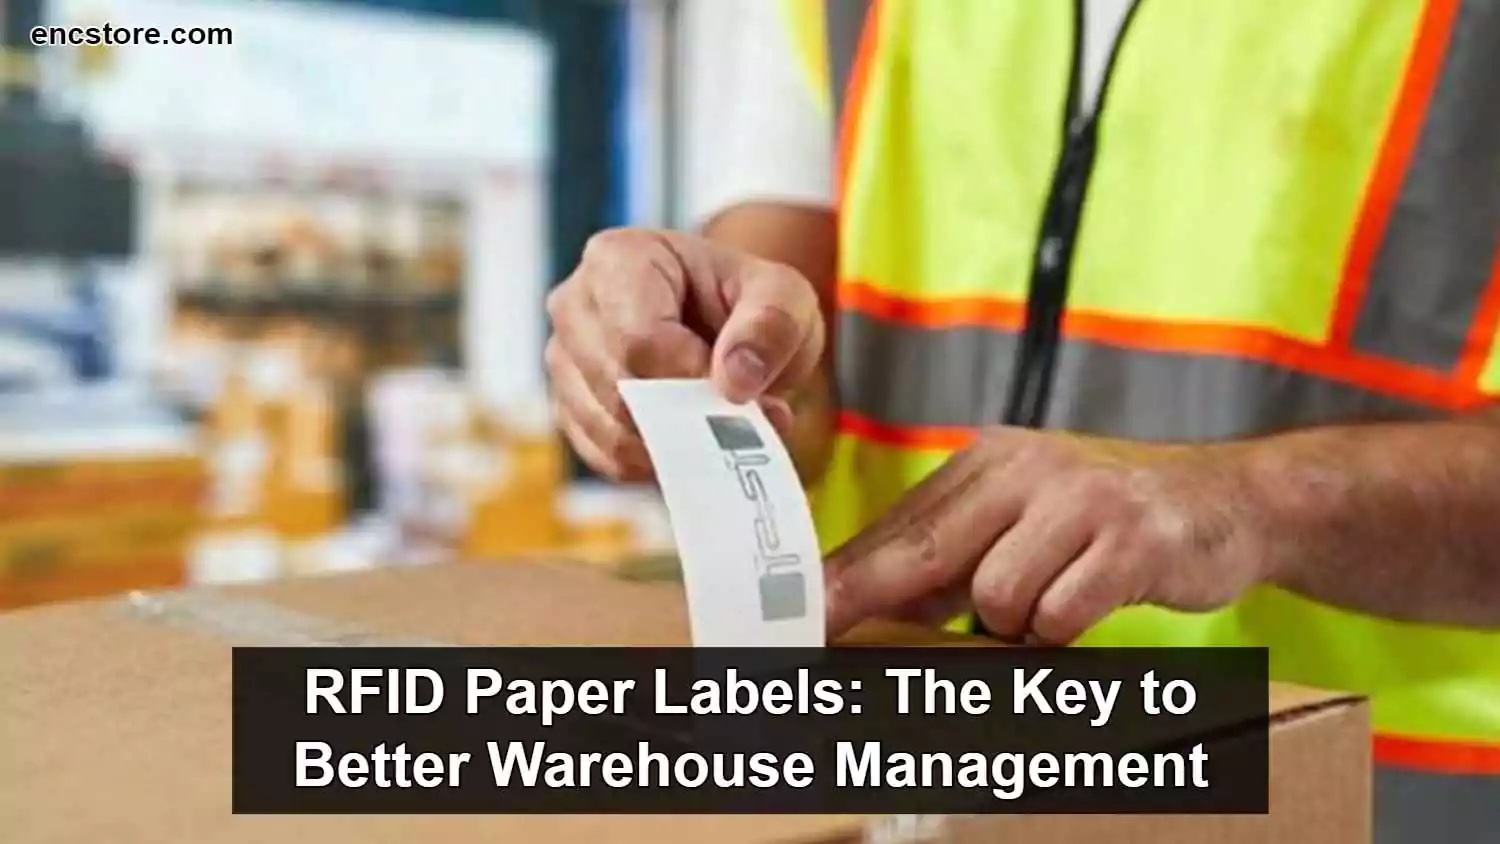 RFID Paper Labels for Warehouse Management